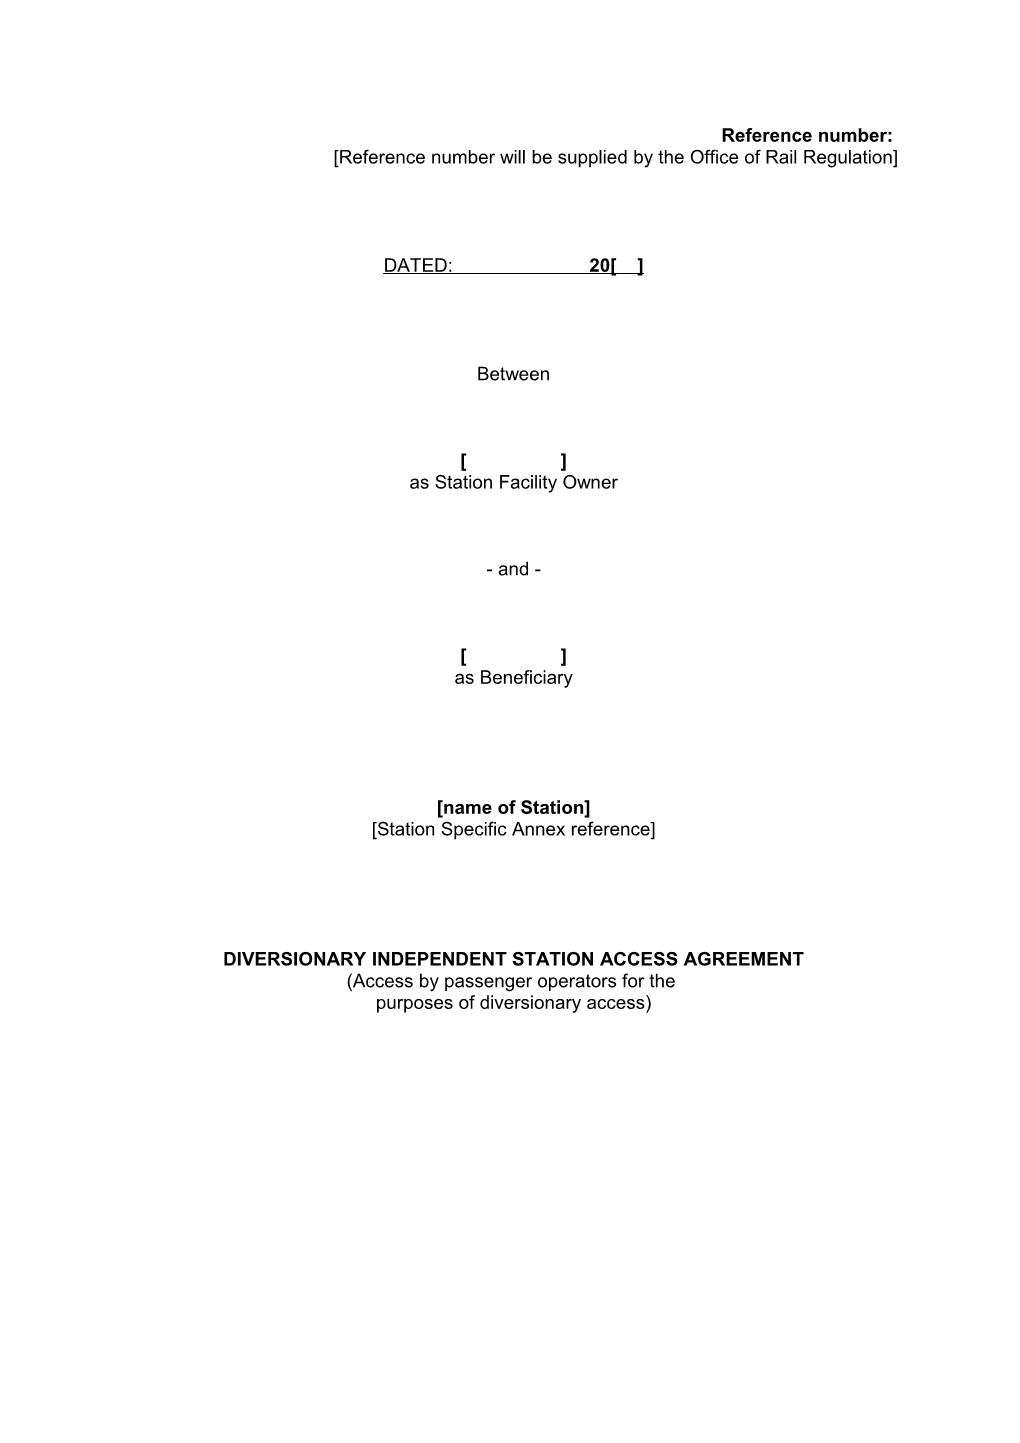 Diversionary Independent Station Access Agreement (Access by Passenger Operators for The